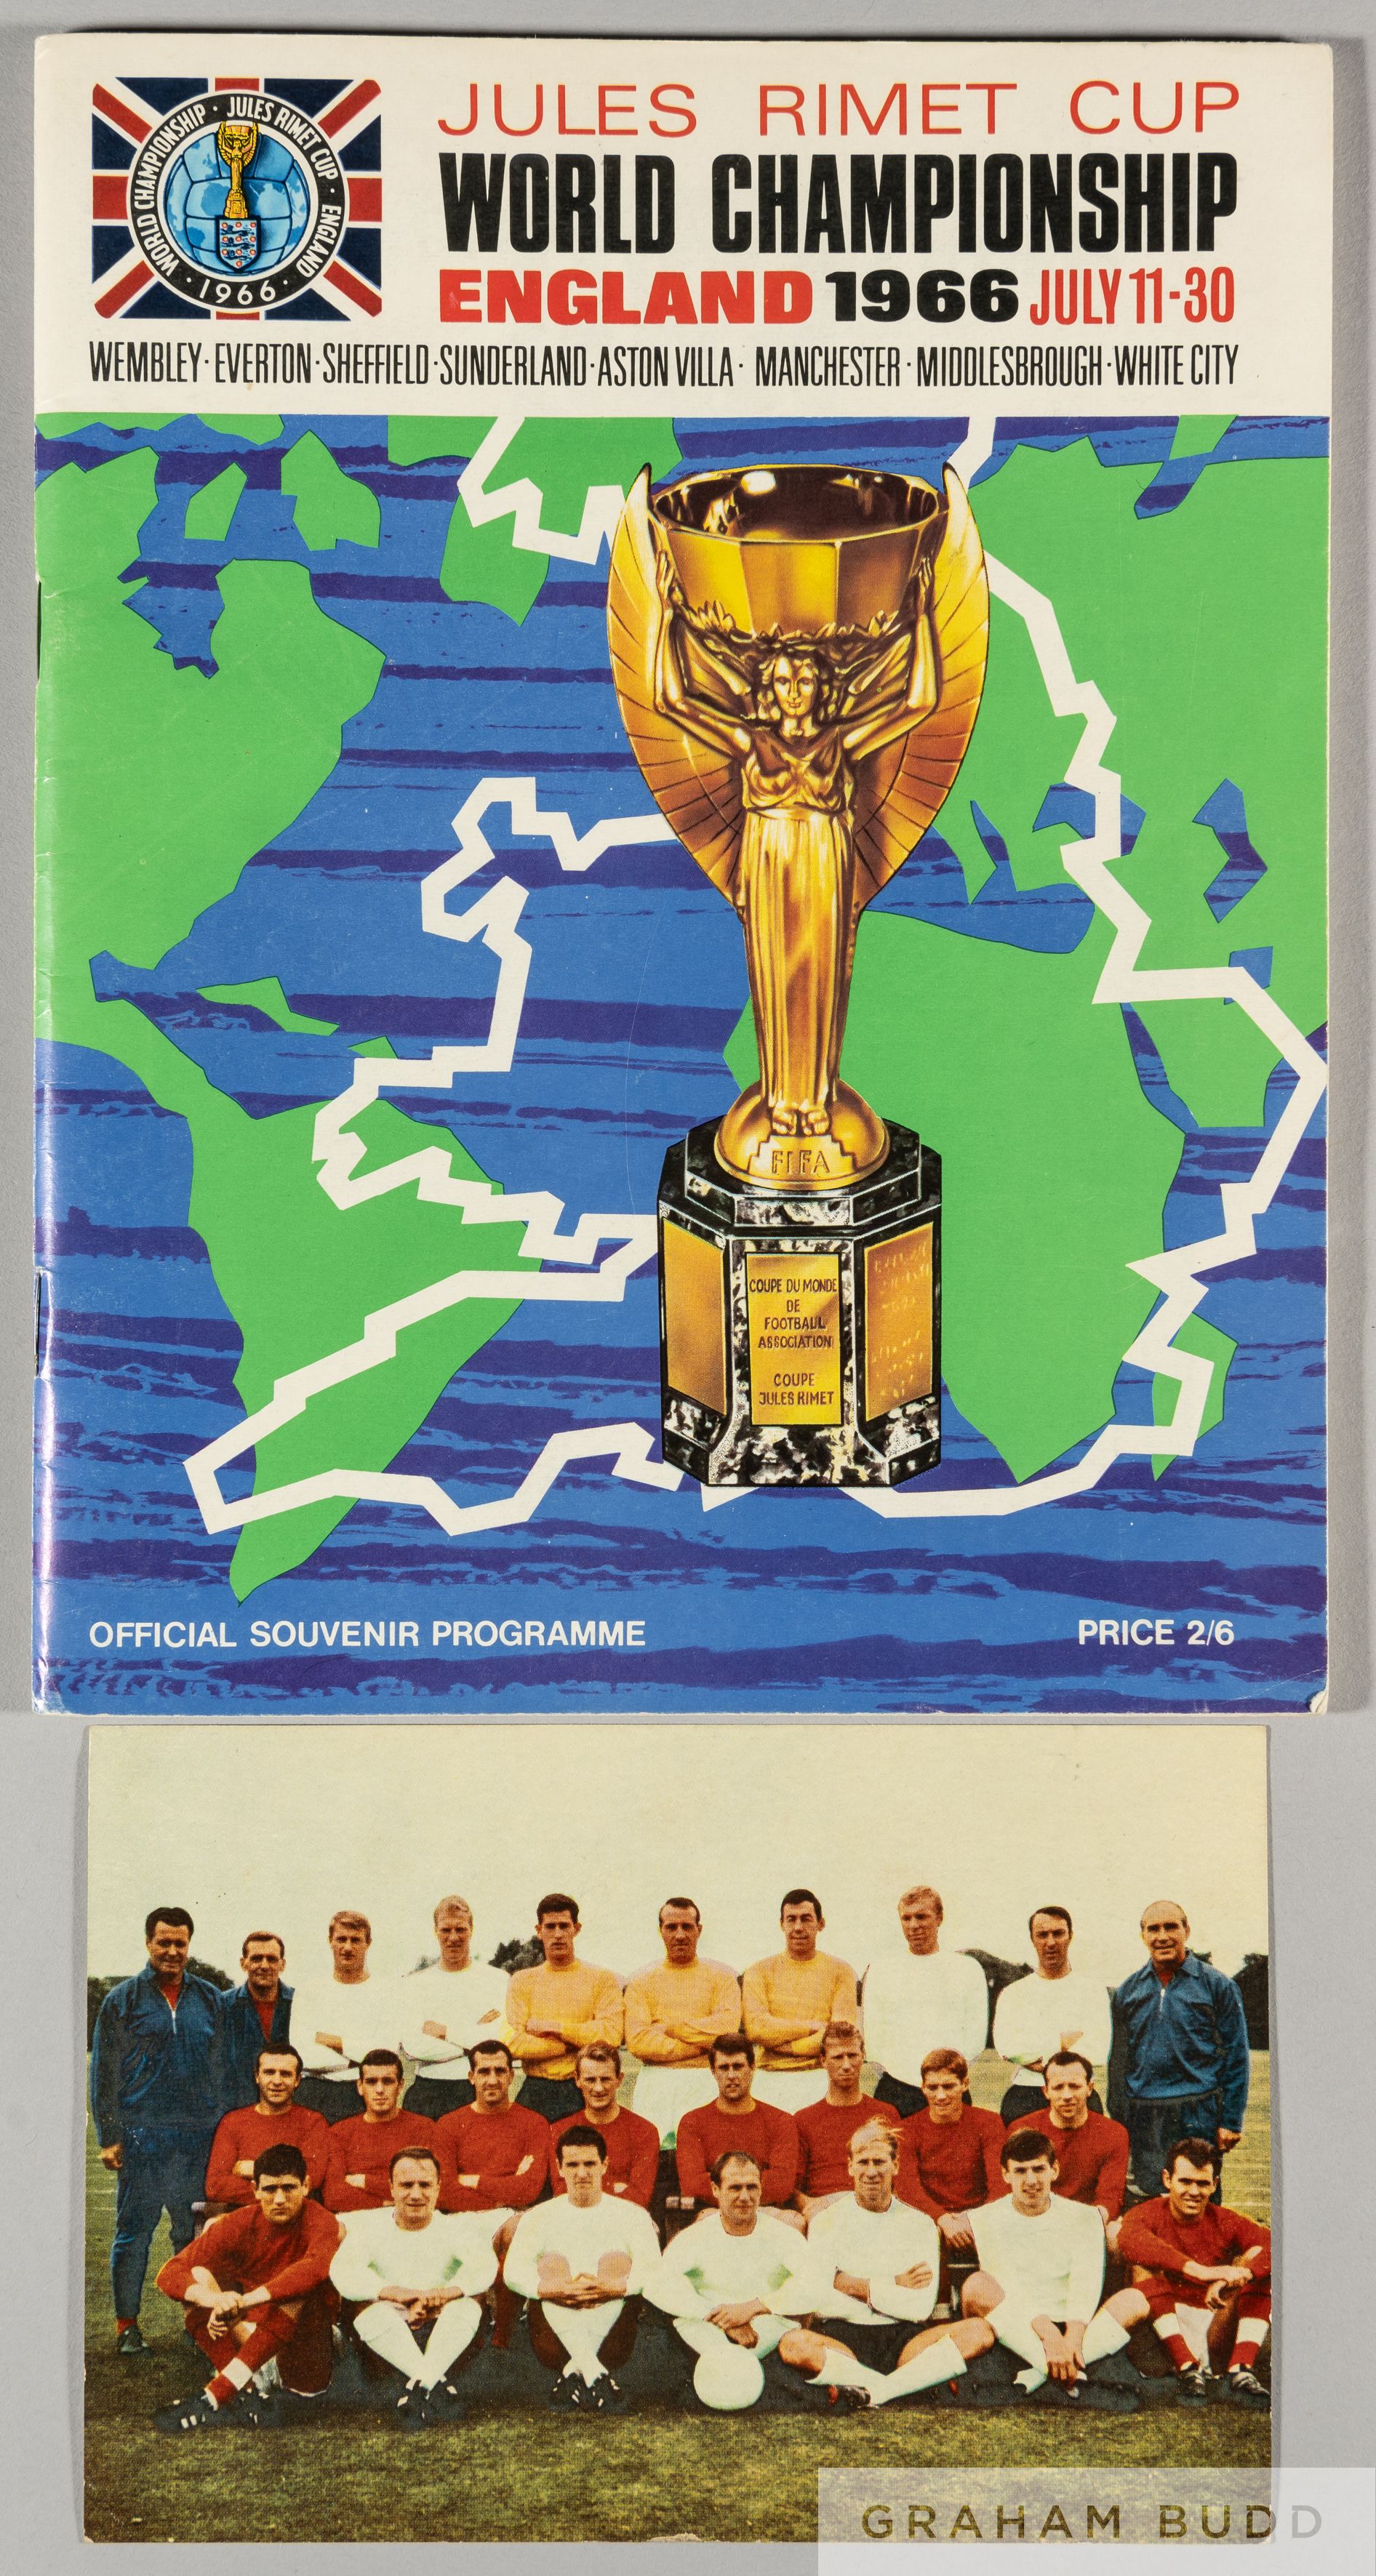 World Cup England 1966 tournament brochure signed to England page by full squad of 22 players,